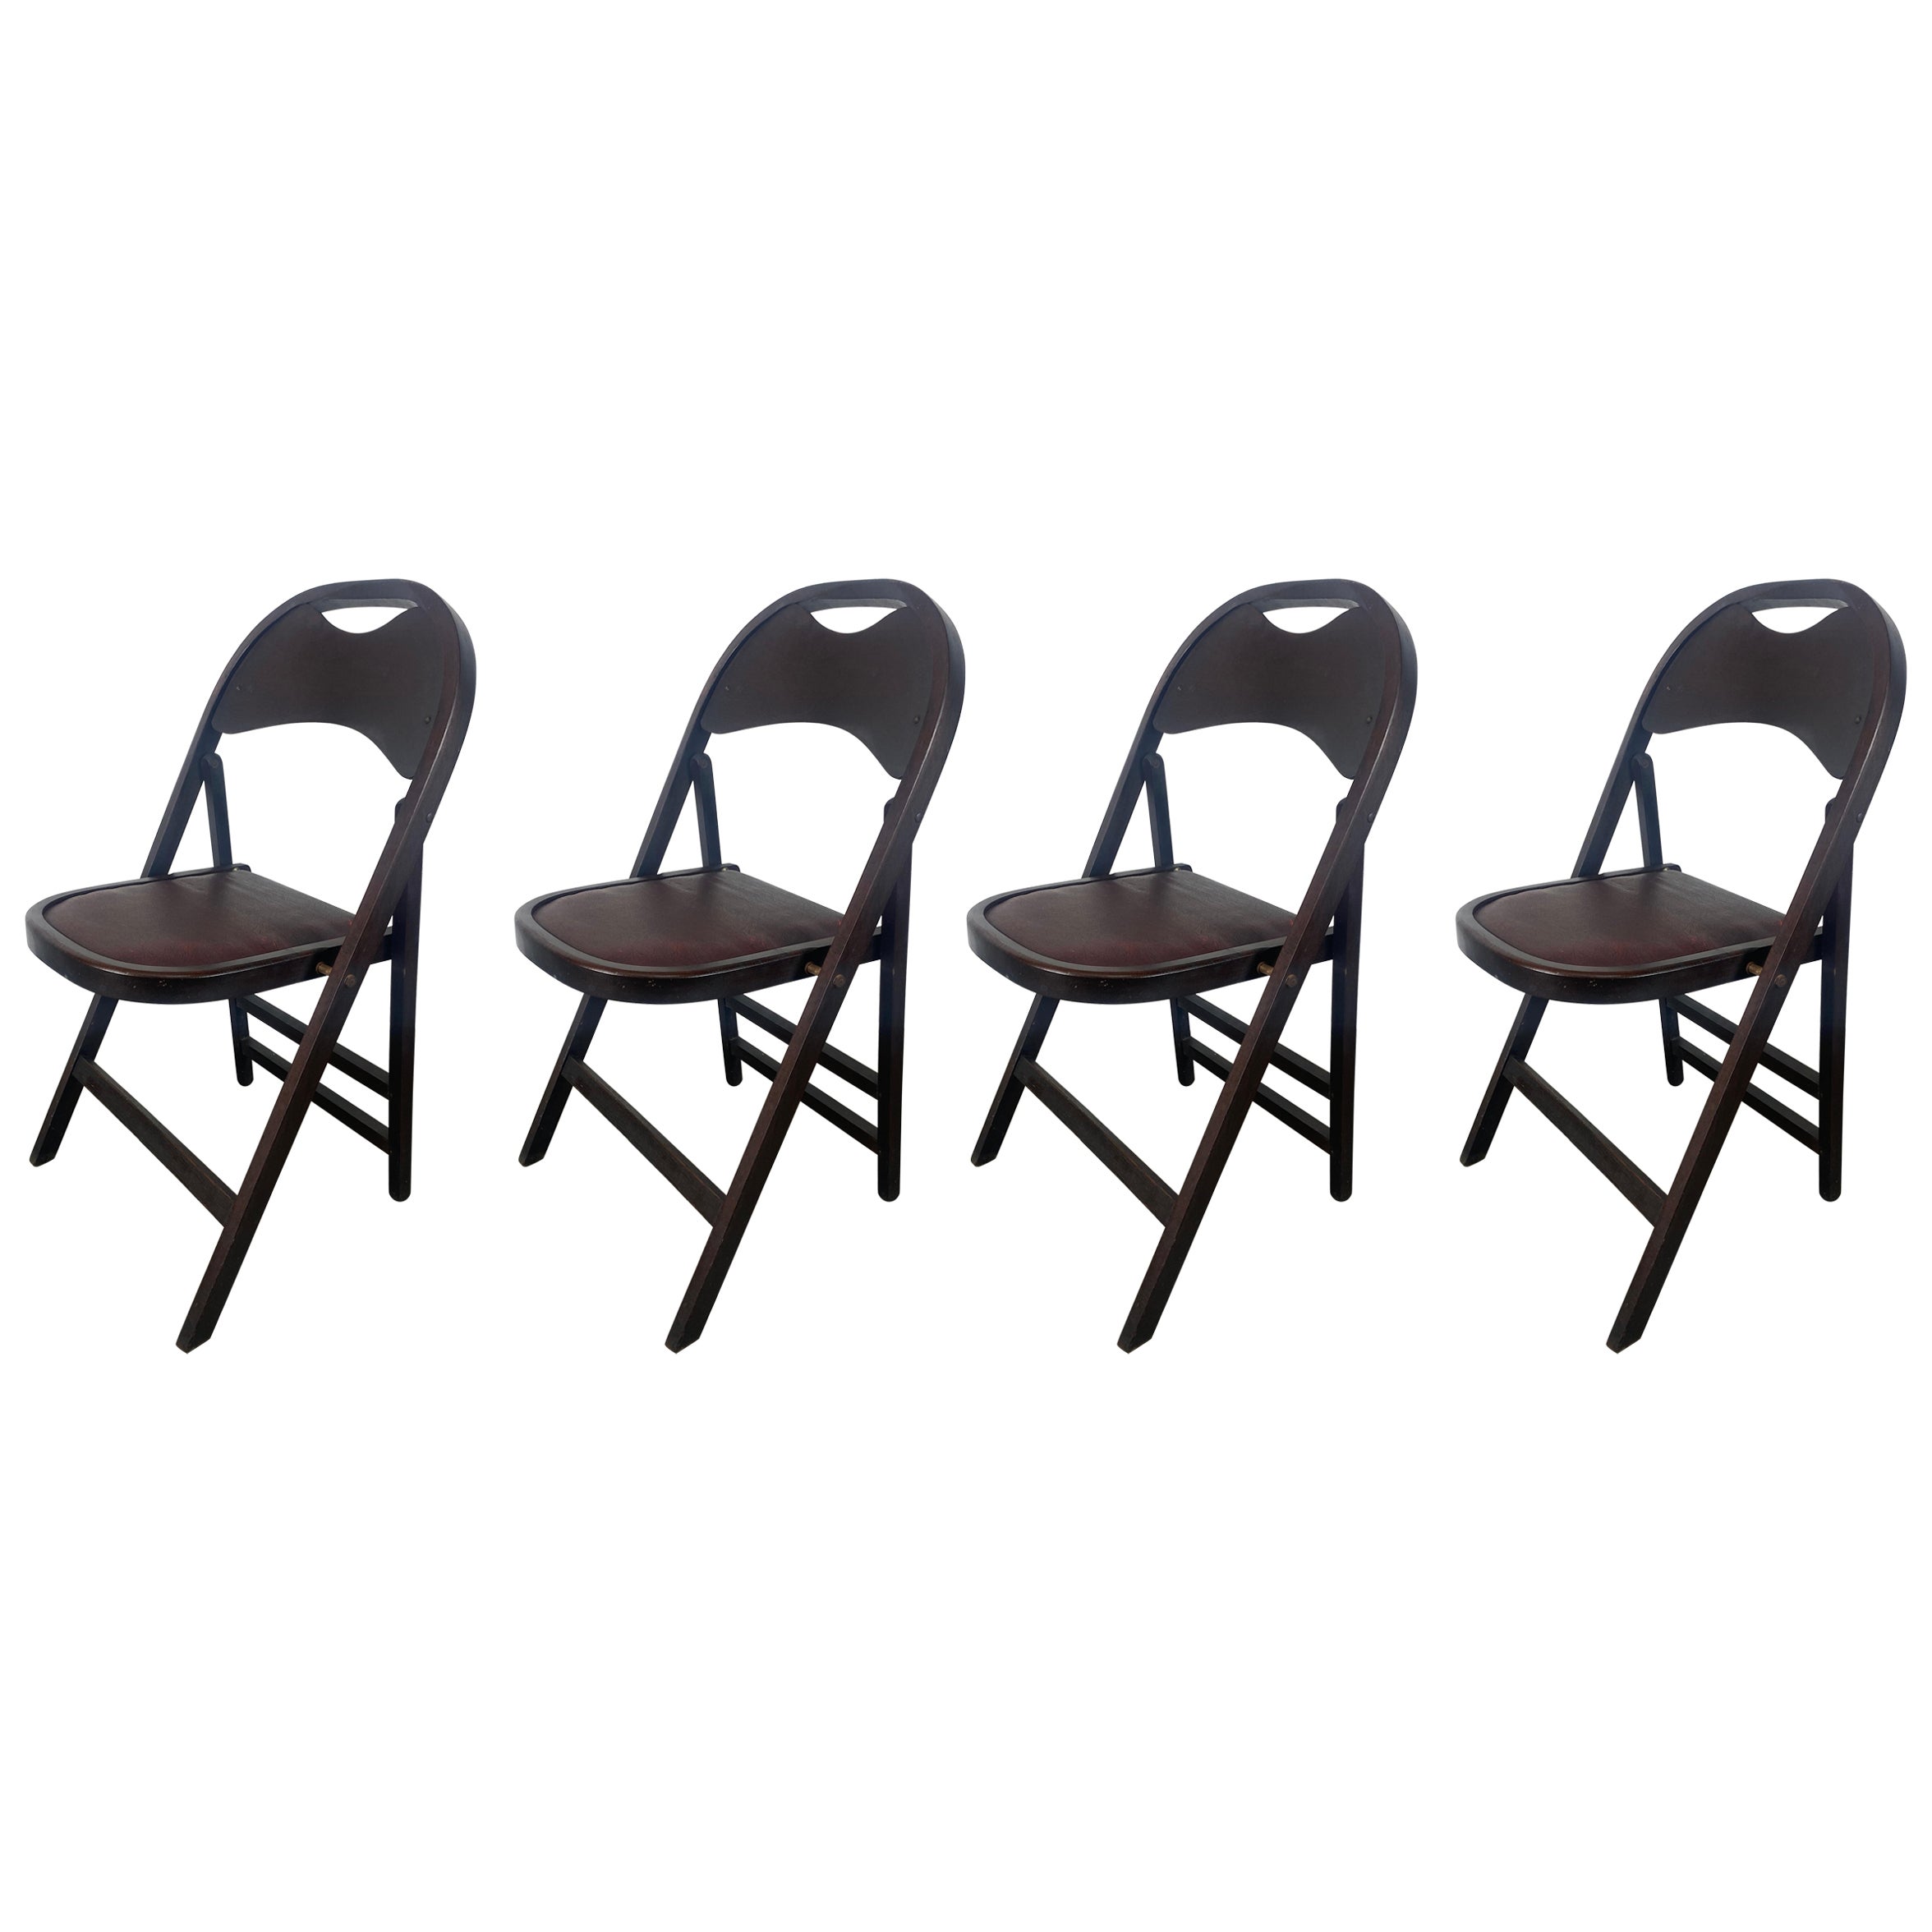 Set 4 Classic Bauhaus Thonet Style Folding Chairs manufactured by Stakmore